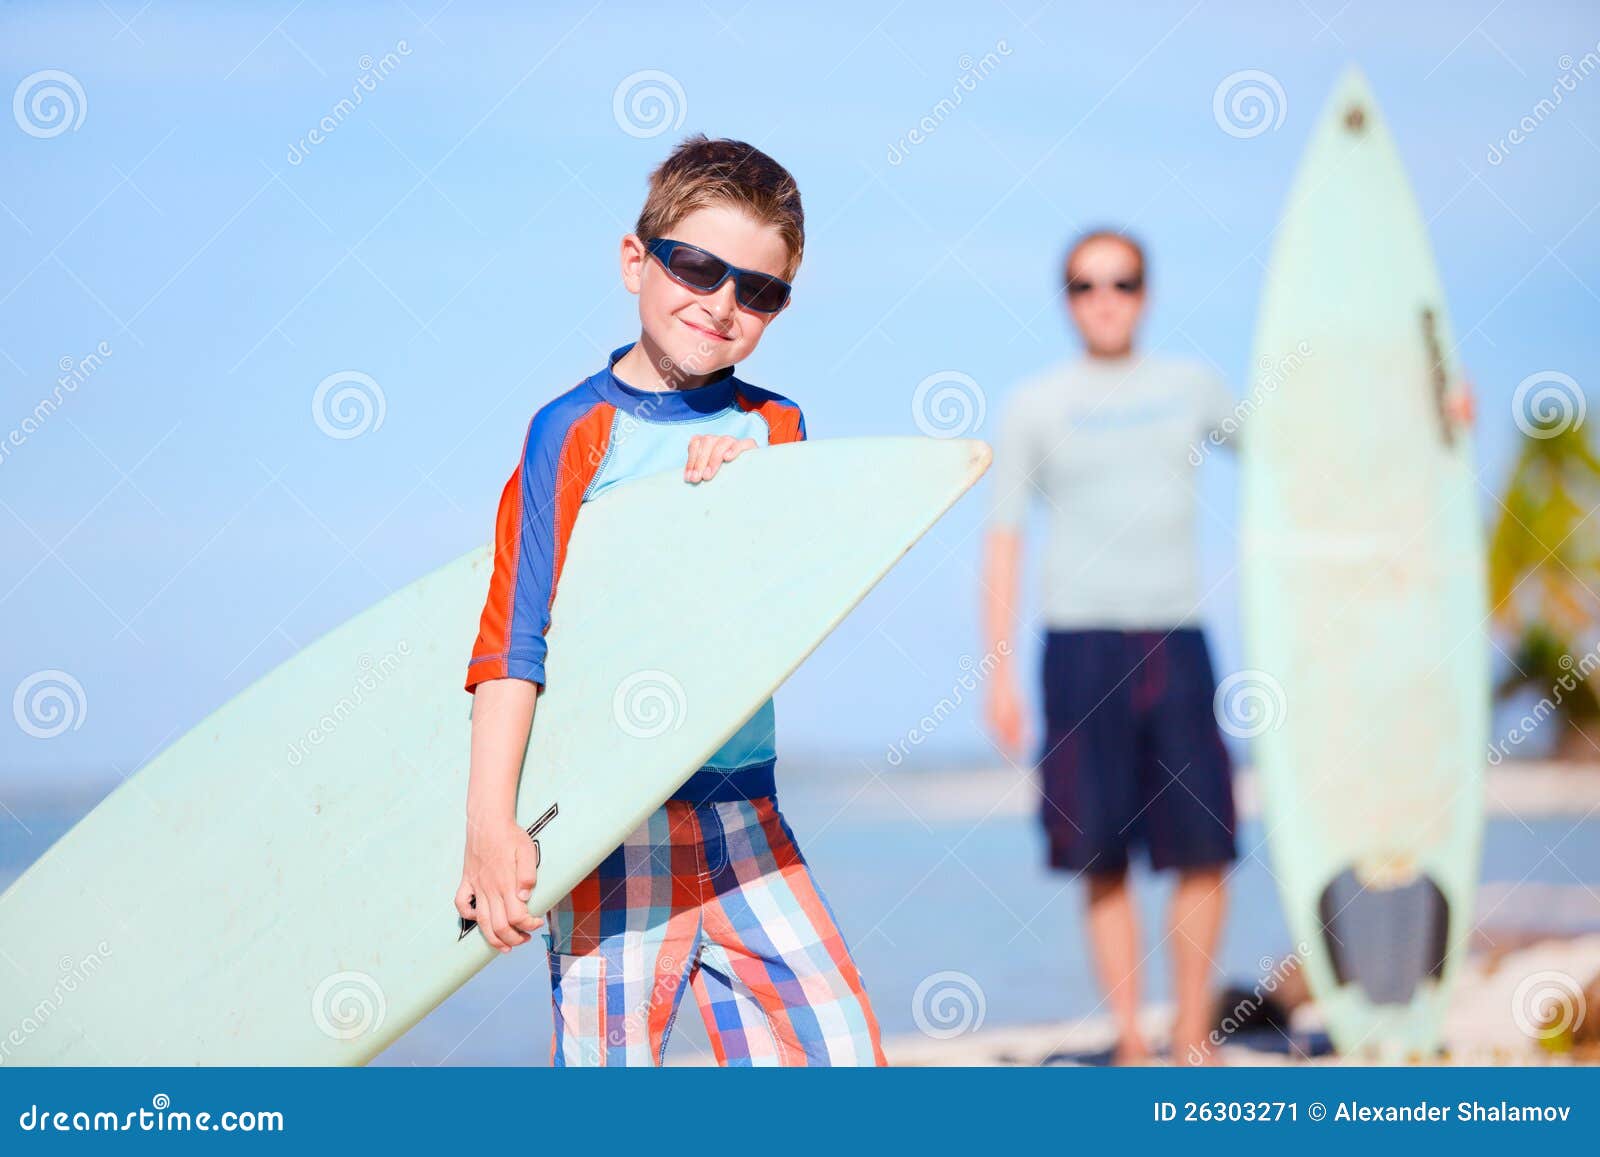 Father and Son with Surfboards Stock Image - Image of activity, healthy ...